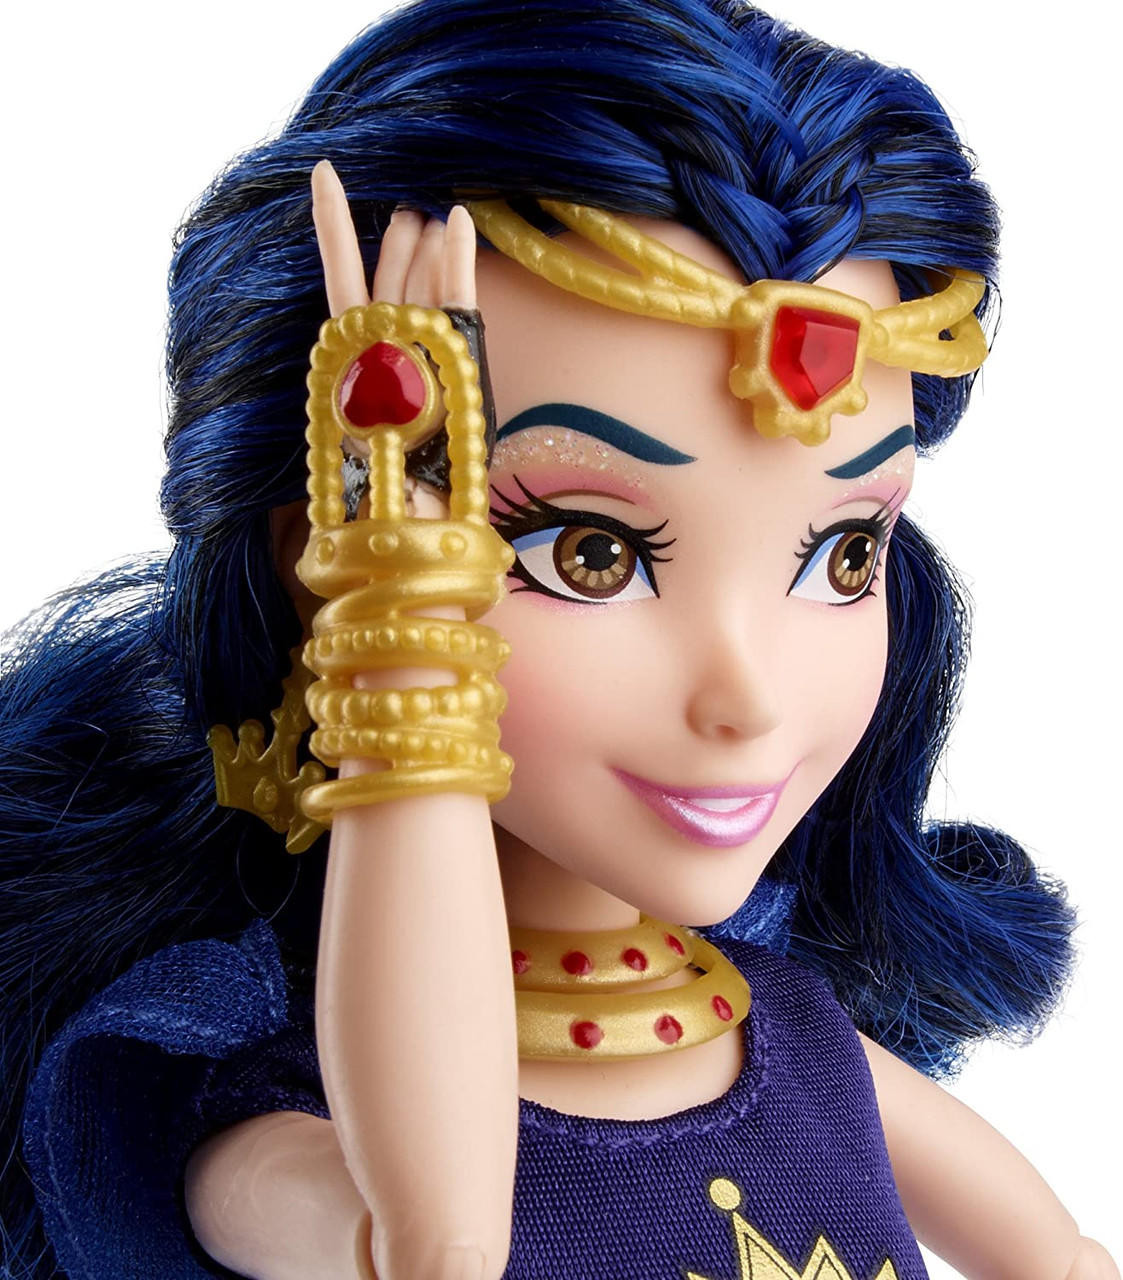 https://cdn11.bigcommerce.com/s-cy4lua1xoh/images/stencil/1280x1280/products/23602/204966/disney-descendants-genie-chic-evie-isle-of-the-lost-doll-2015-hasbro-b5740__53890.1689714071.jpg?c=1?imbypass=on